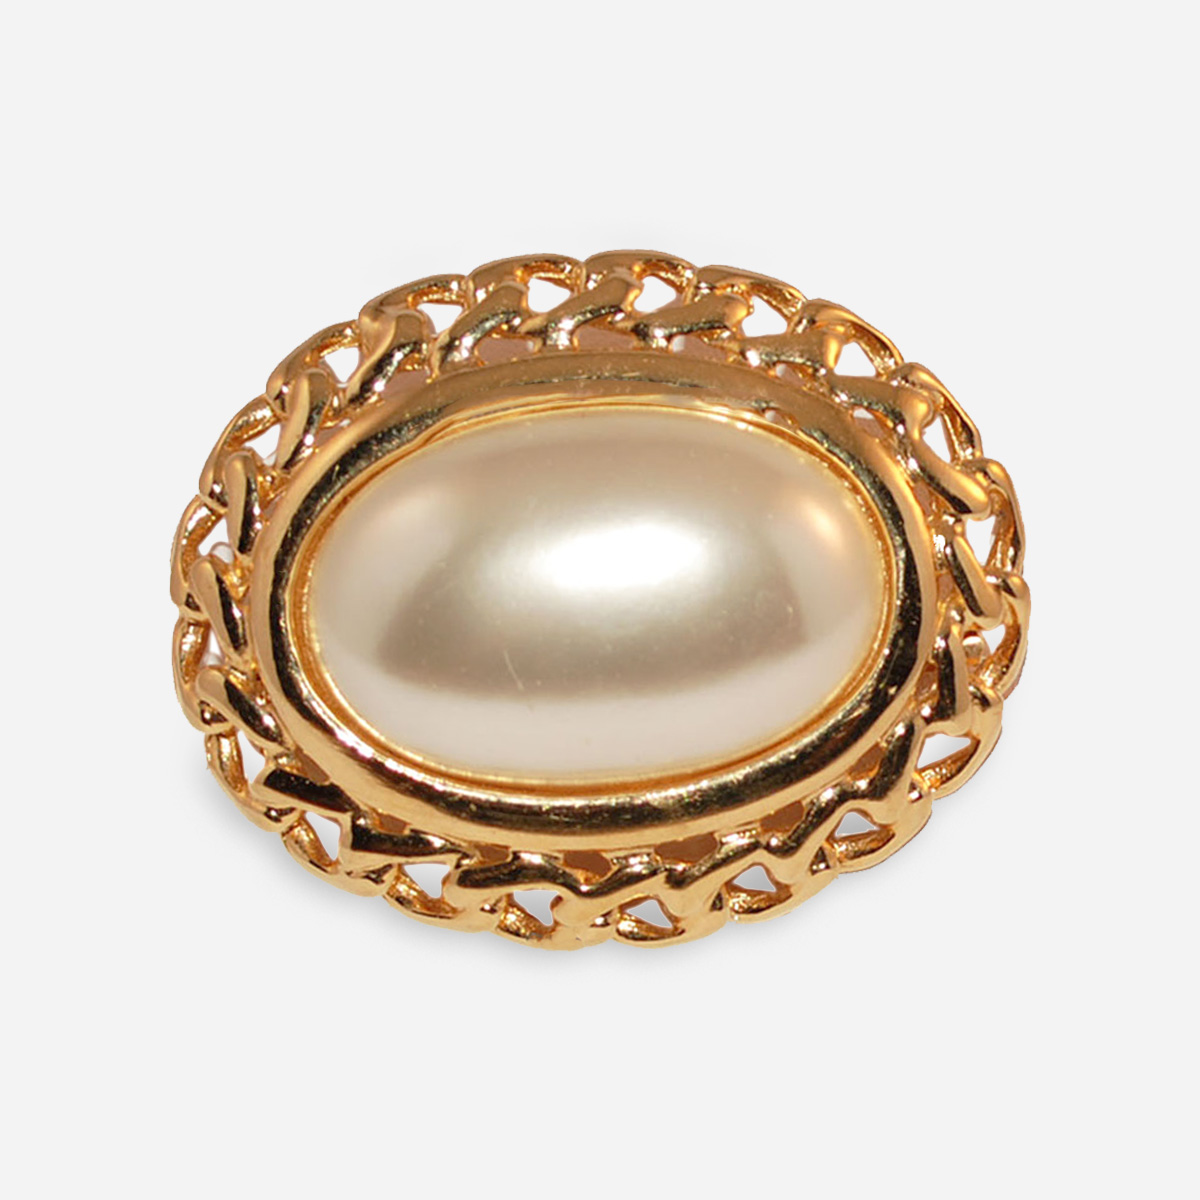 Napier Mabe Pearl brooch